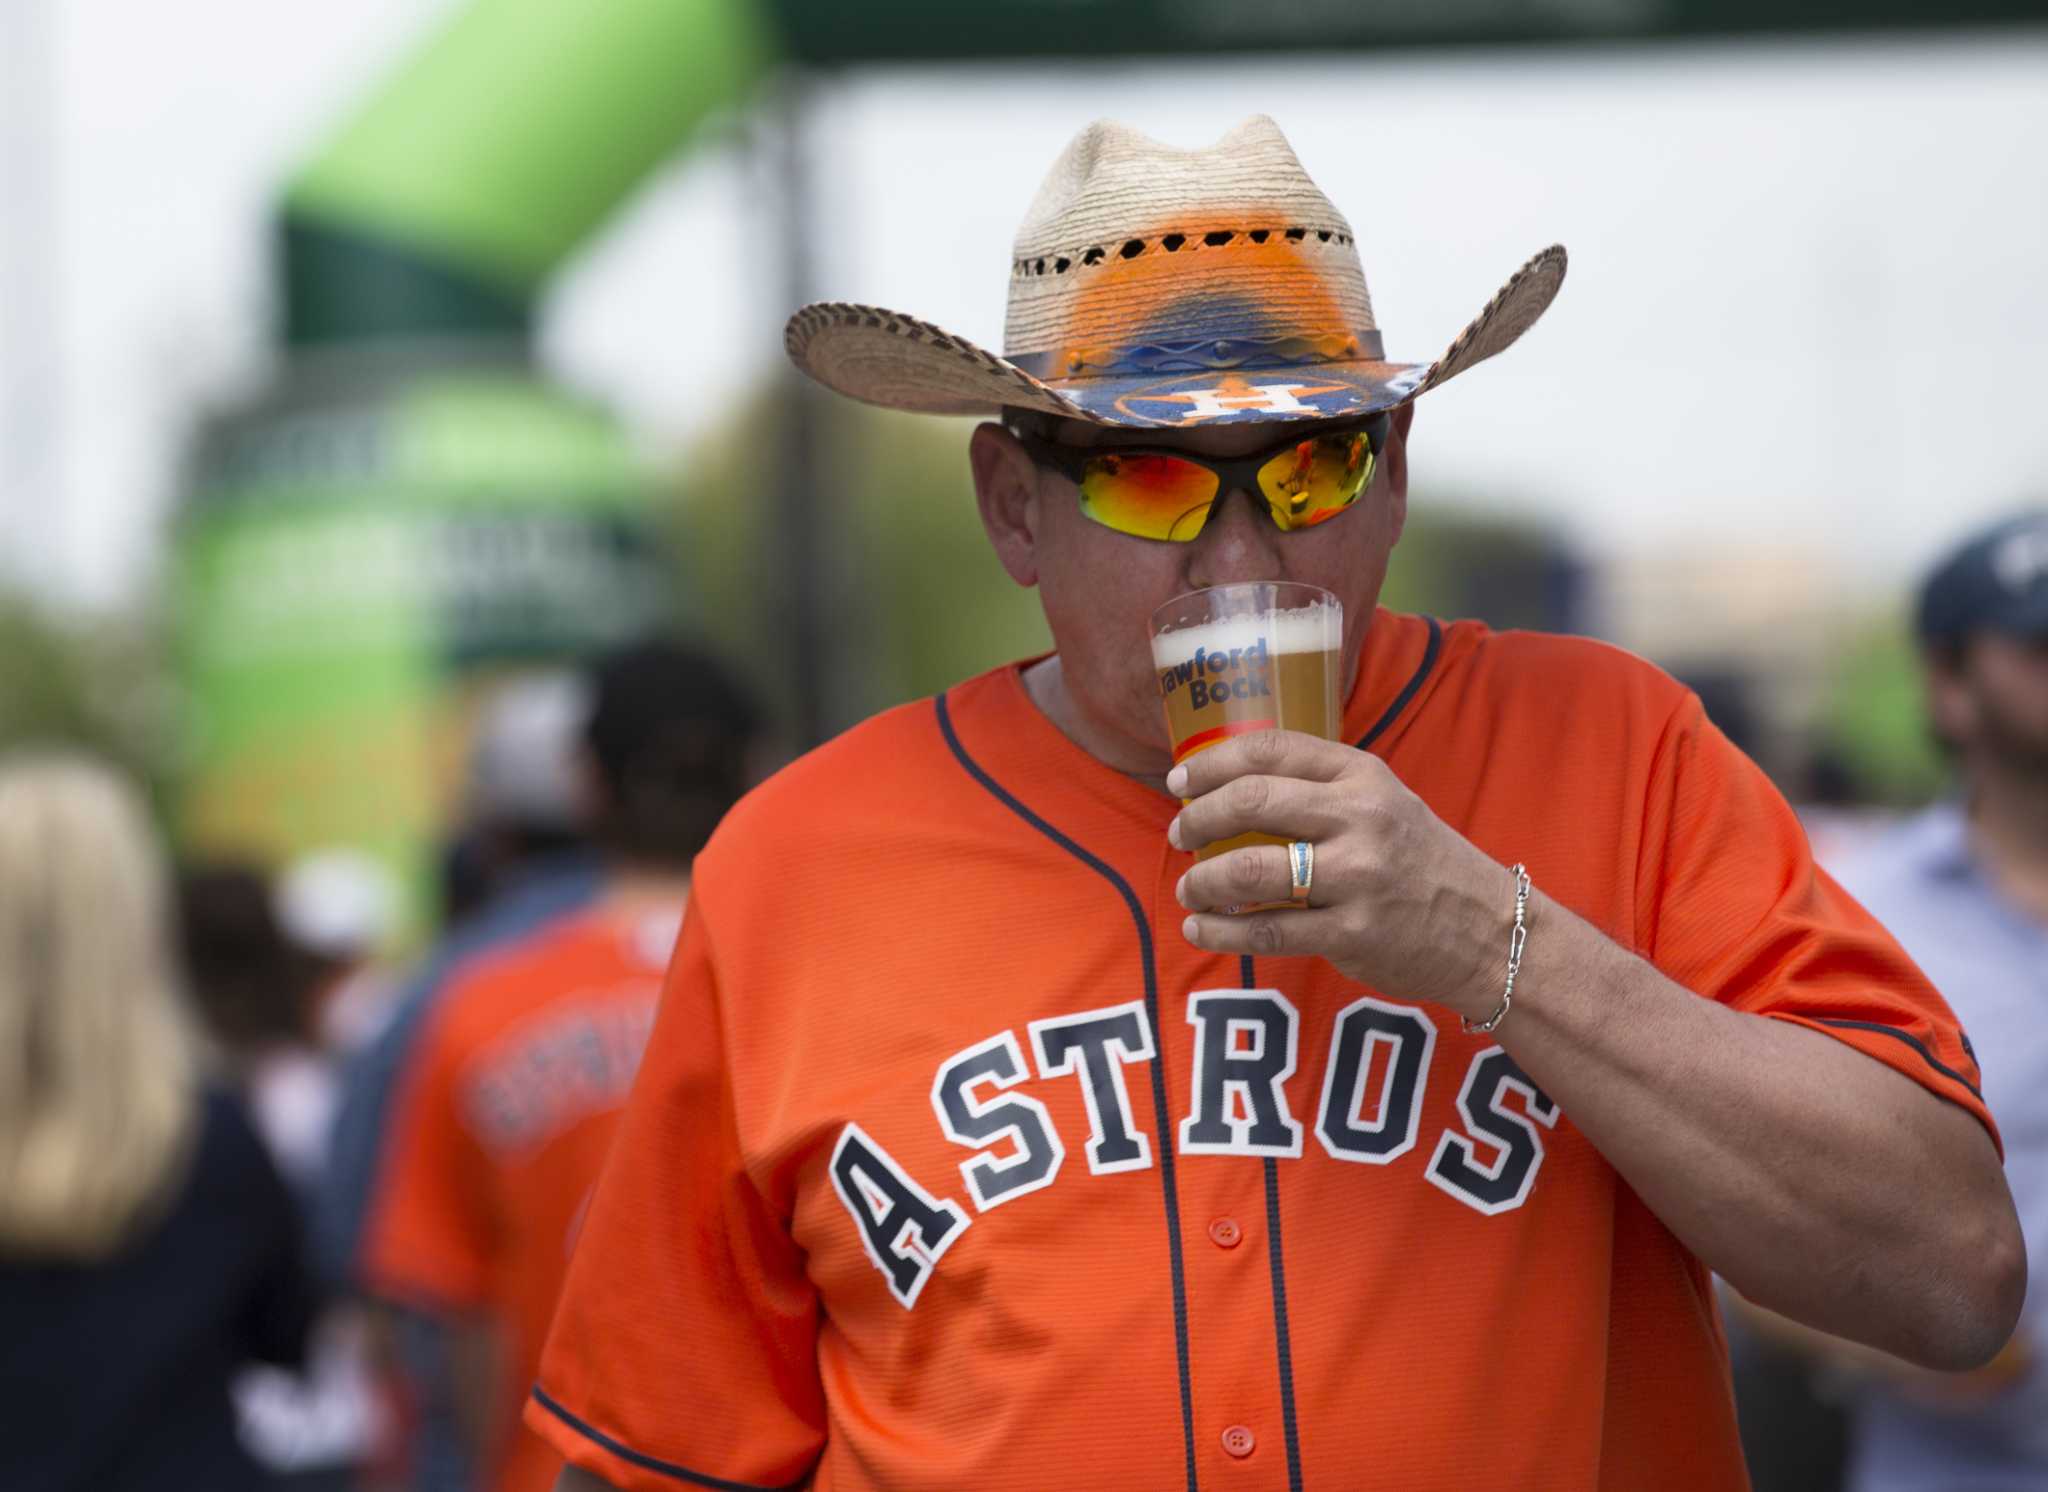 MLB pitch clock: We can all drink to baseball's faster pace